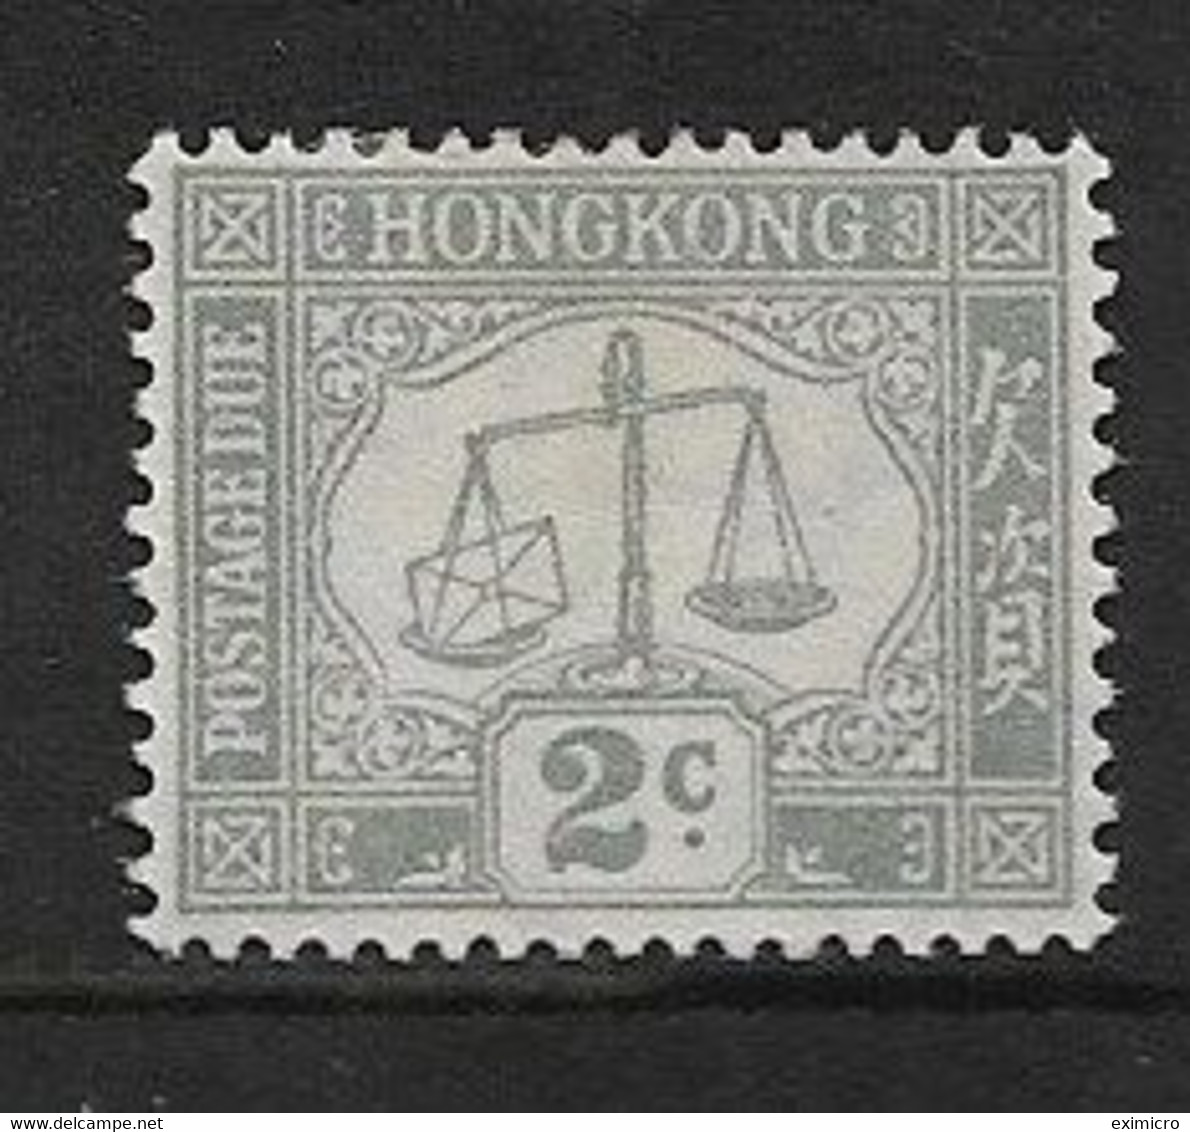 HONG KONG 1938 2c POSTAGE DUE SG D6 MOUNTED MINT Cat £7 - Postage Due